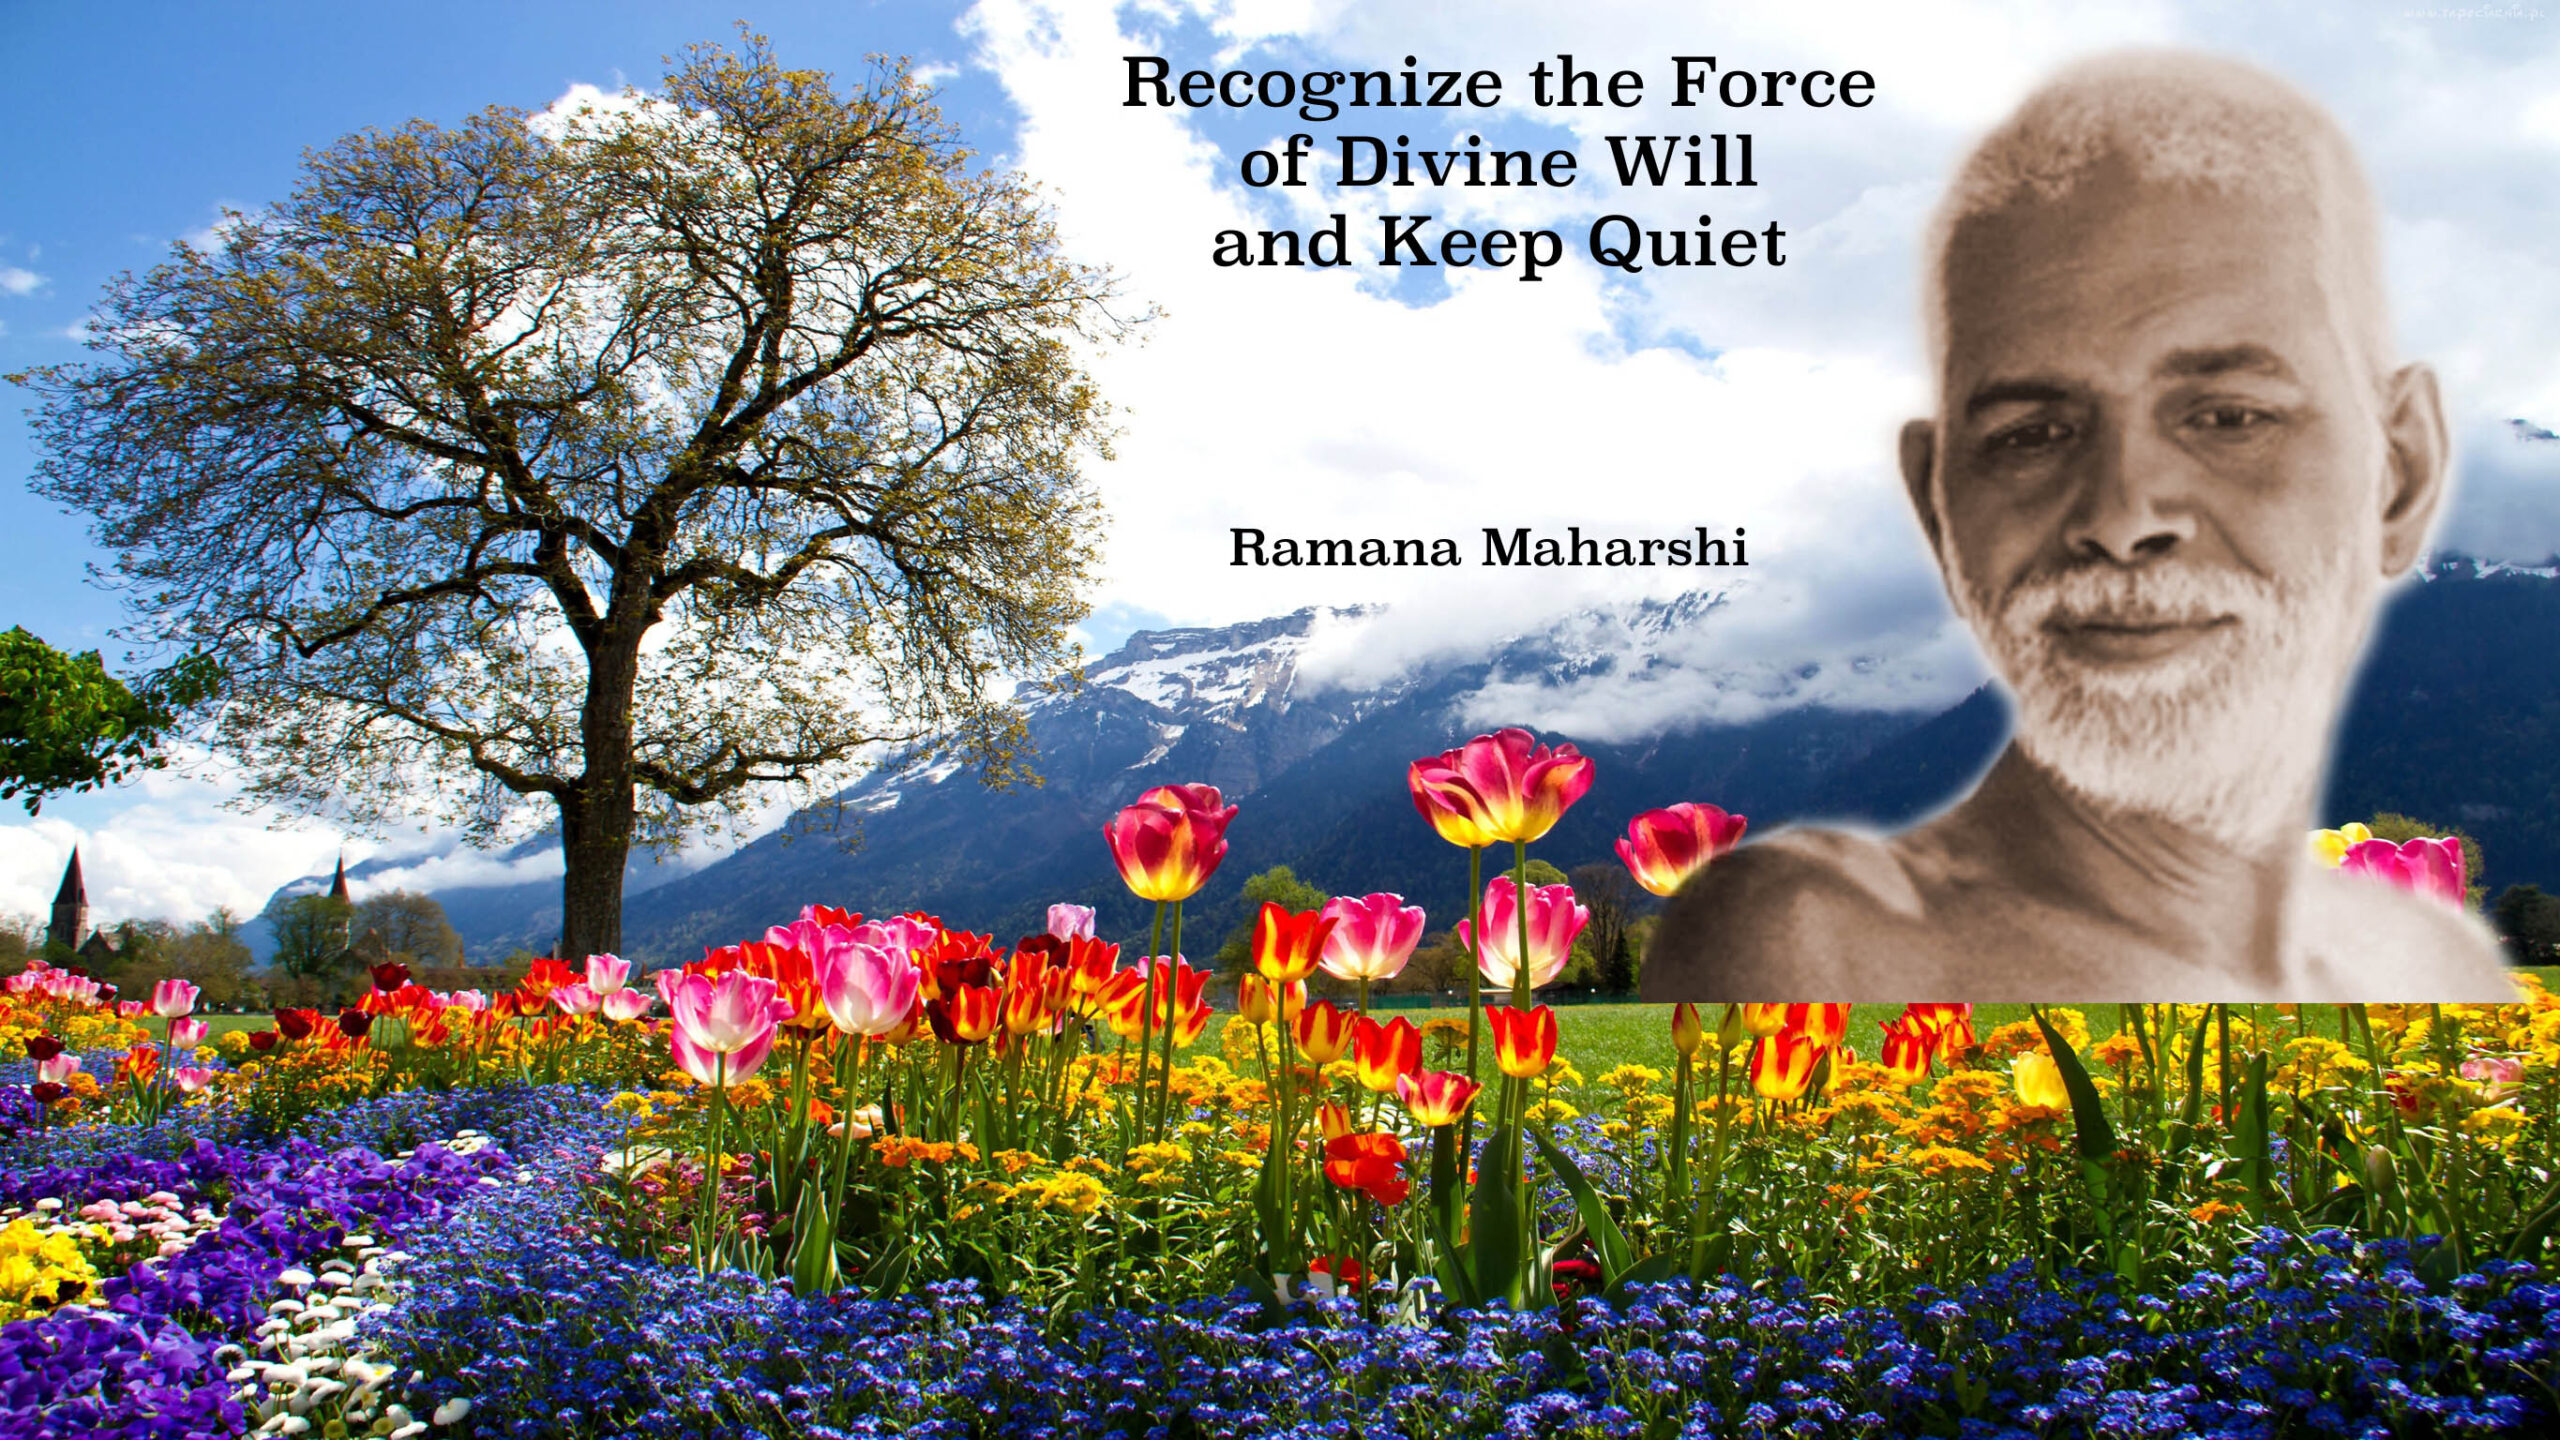 Recognize the force of divine will and keep quiet